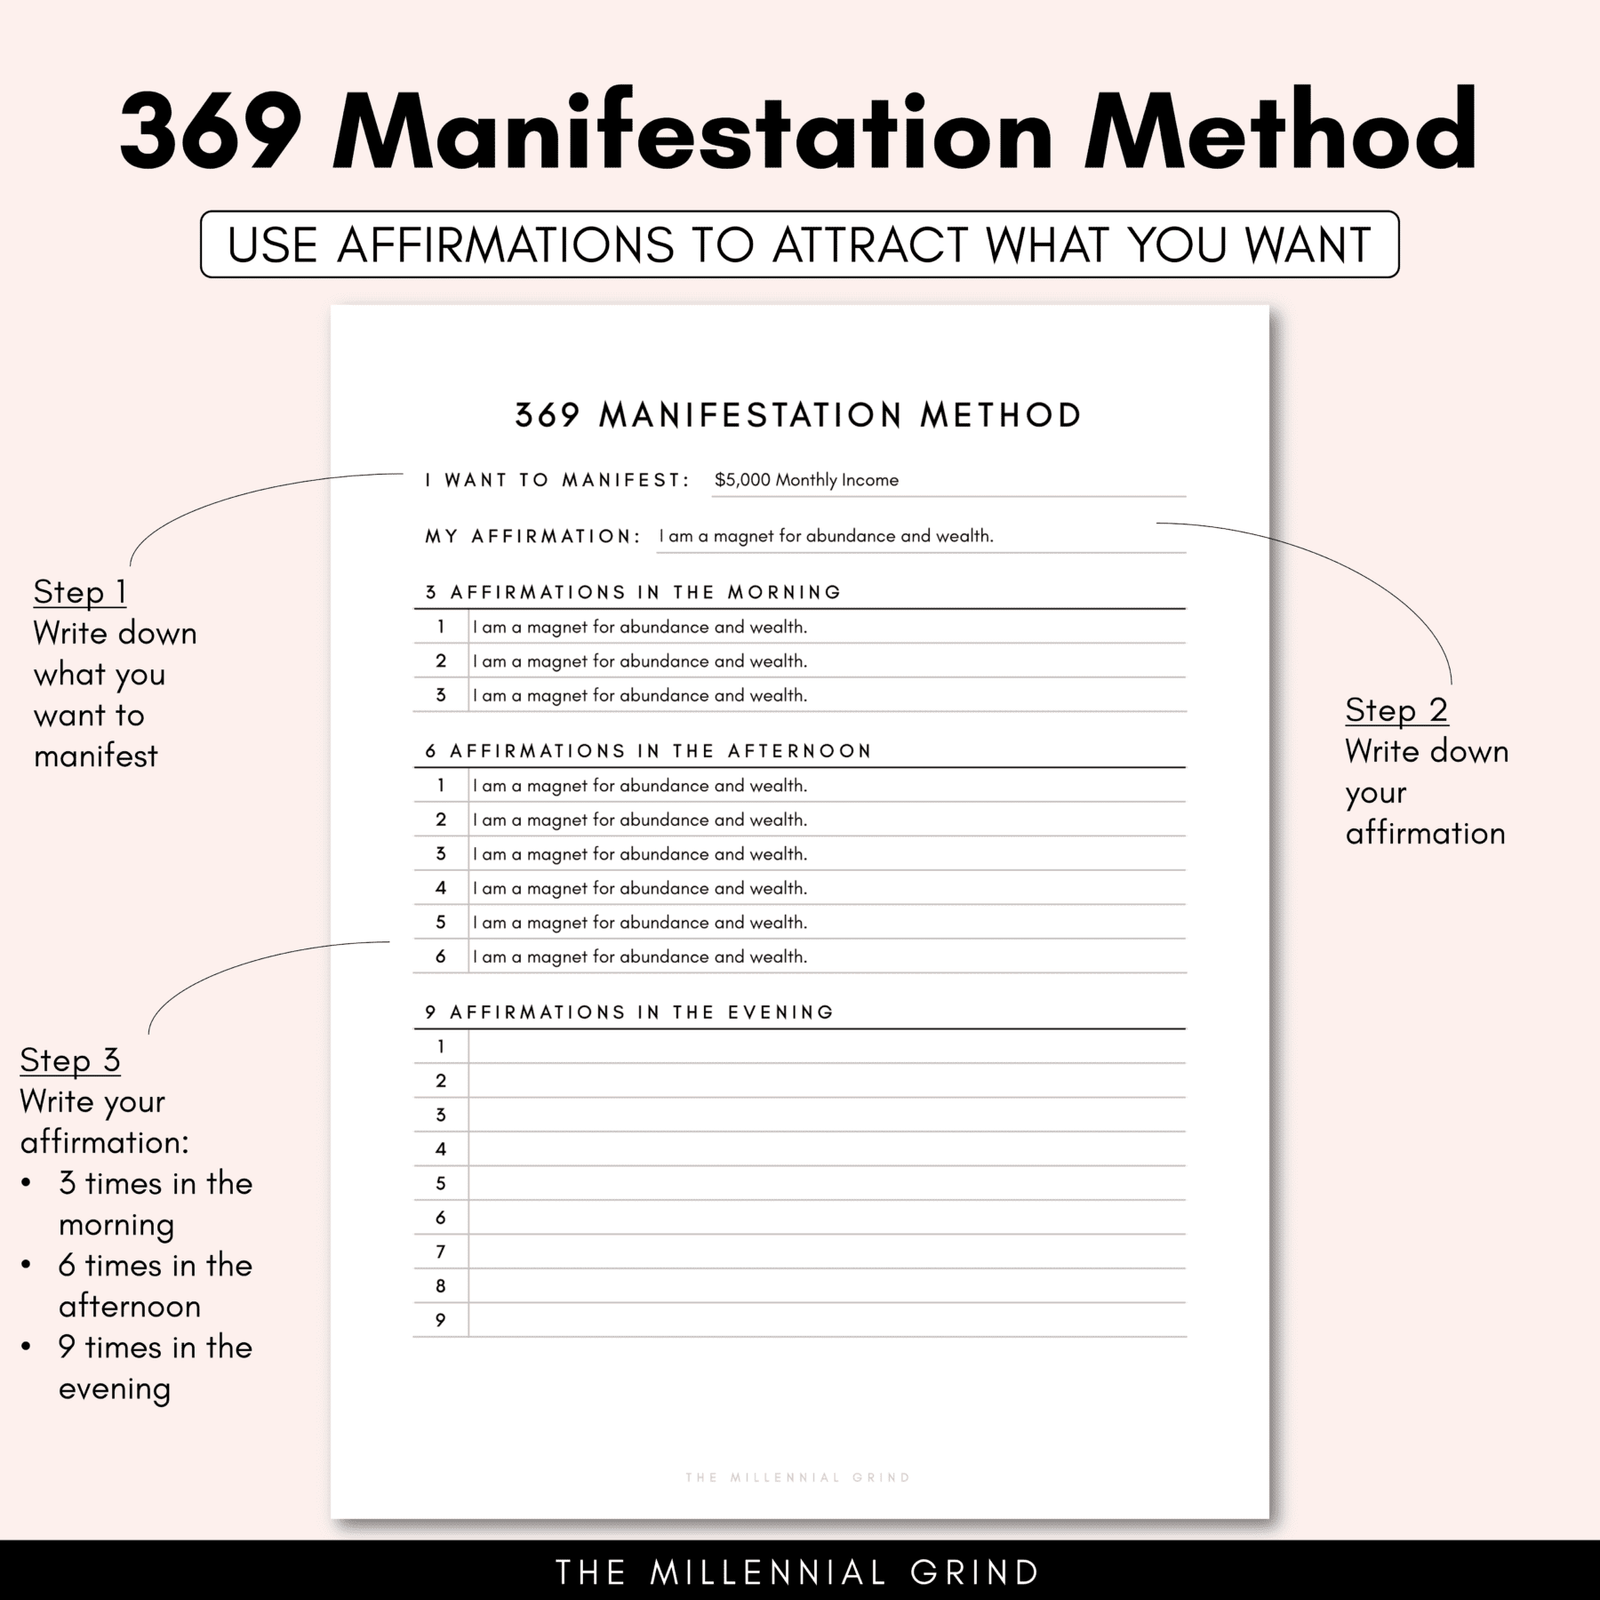 How long do it take for the 369 method to work?